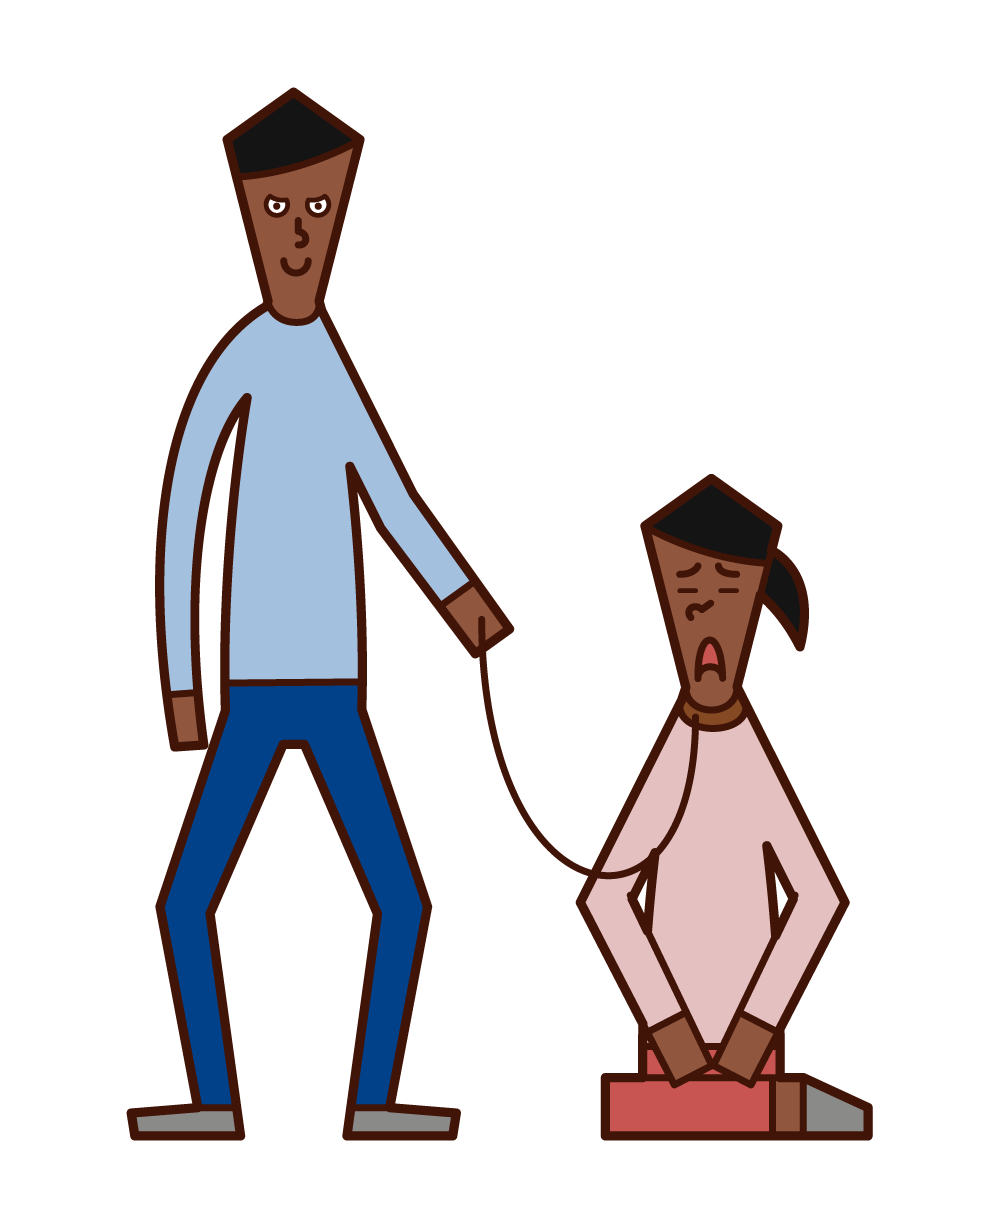 Illustration of a man (male) who submits a woman